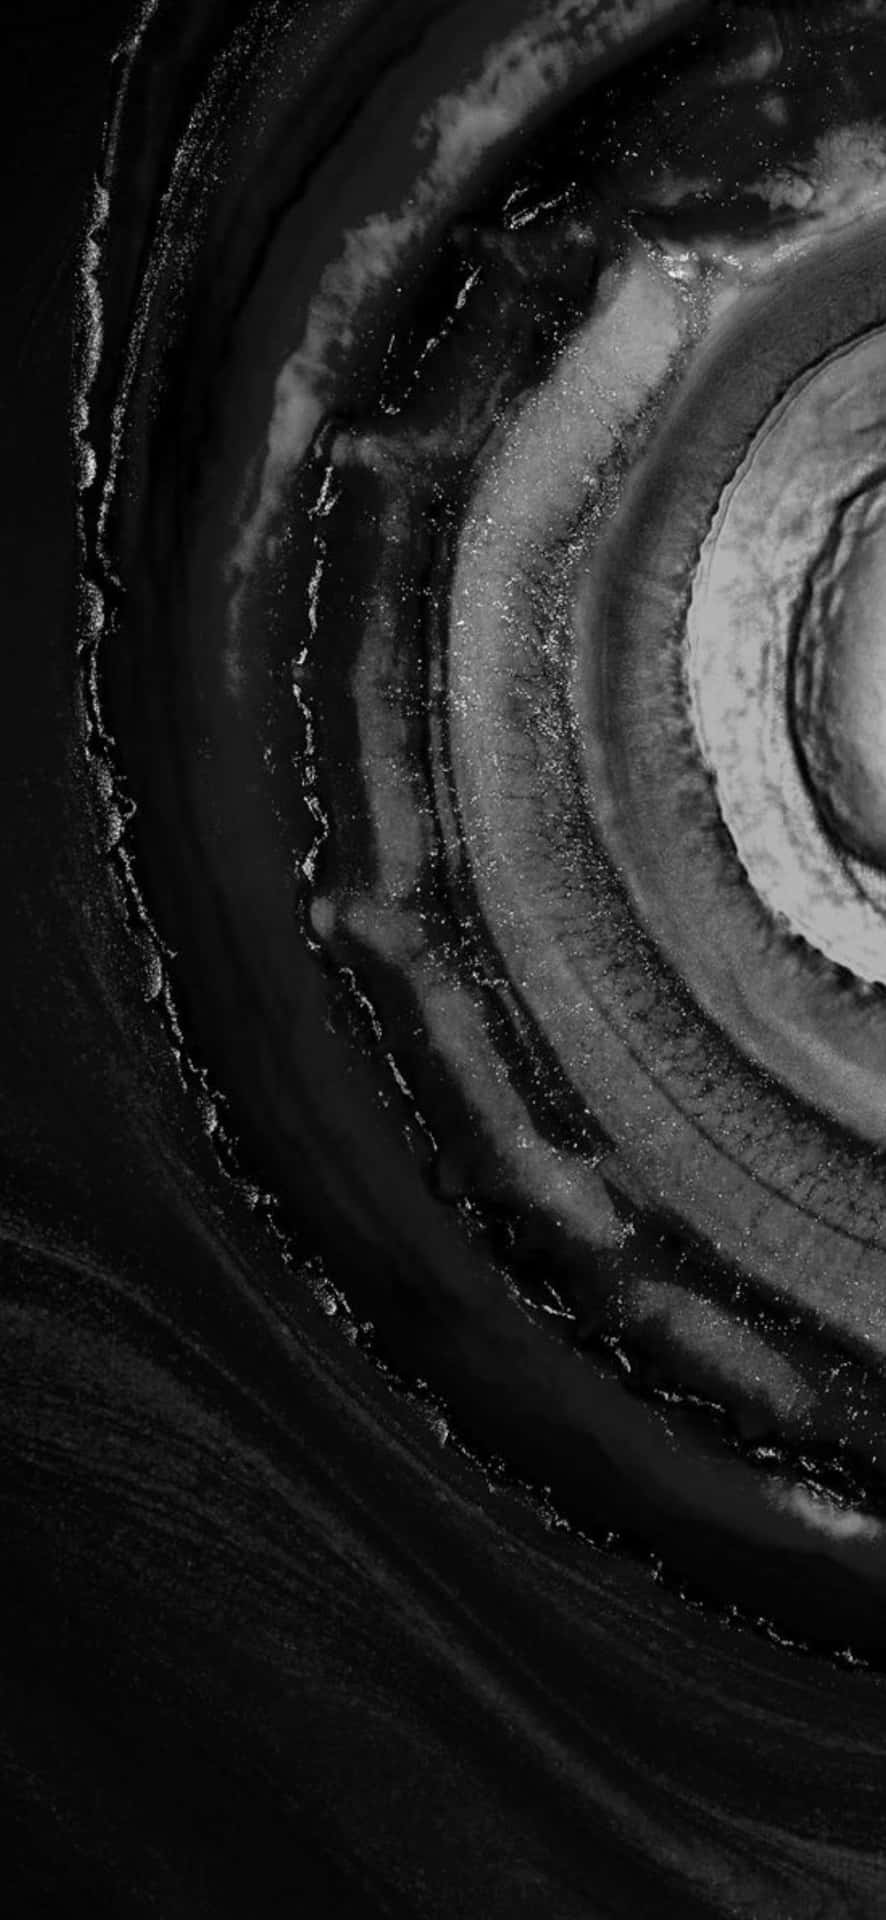 Abstract Blackand White Ripple Texture Wallpaper